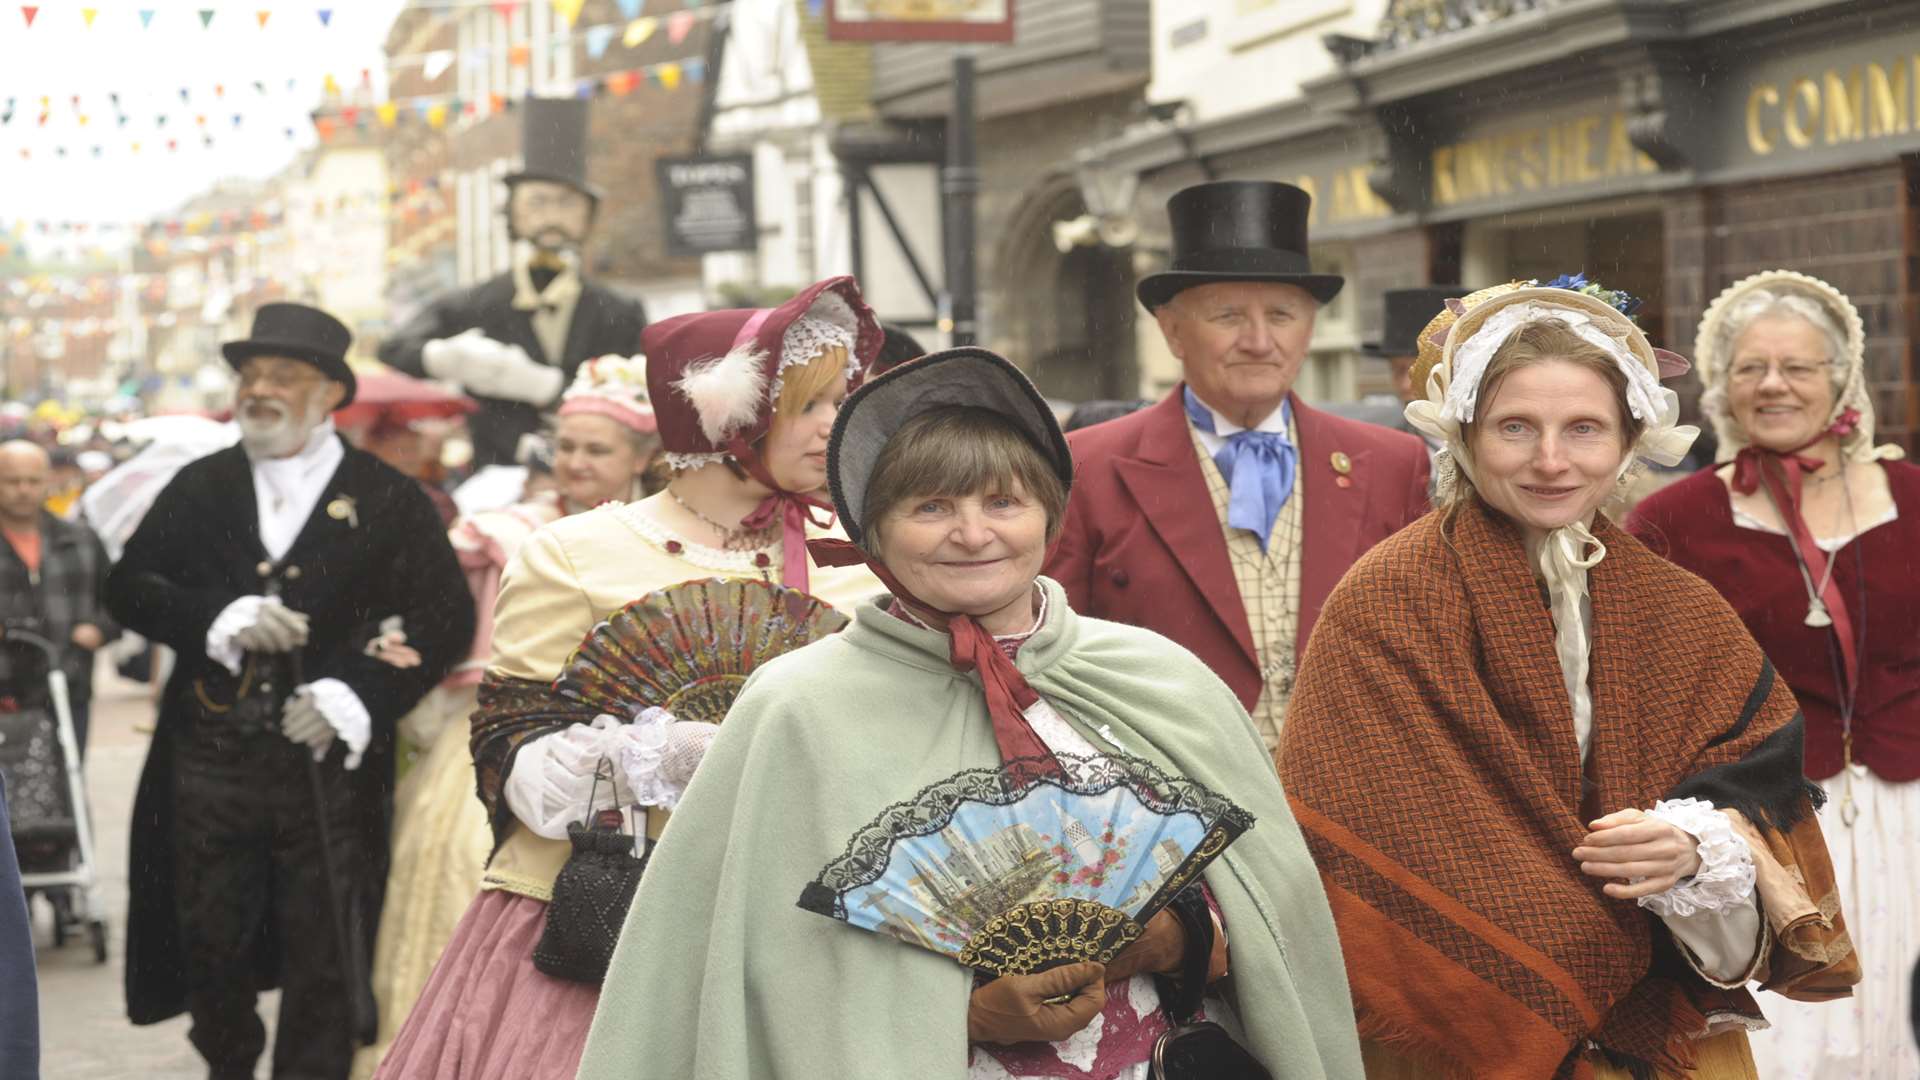 This year's festival has the theme of the Old Curiosity Shop